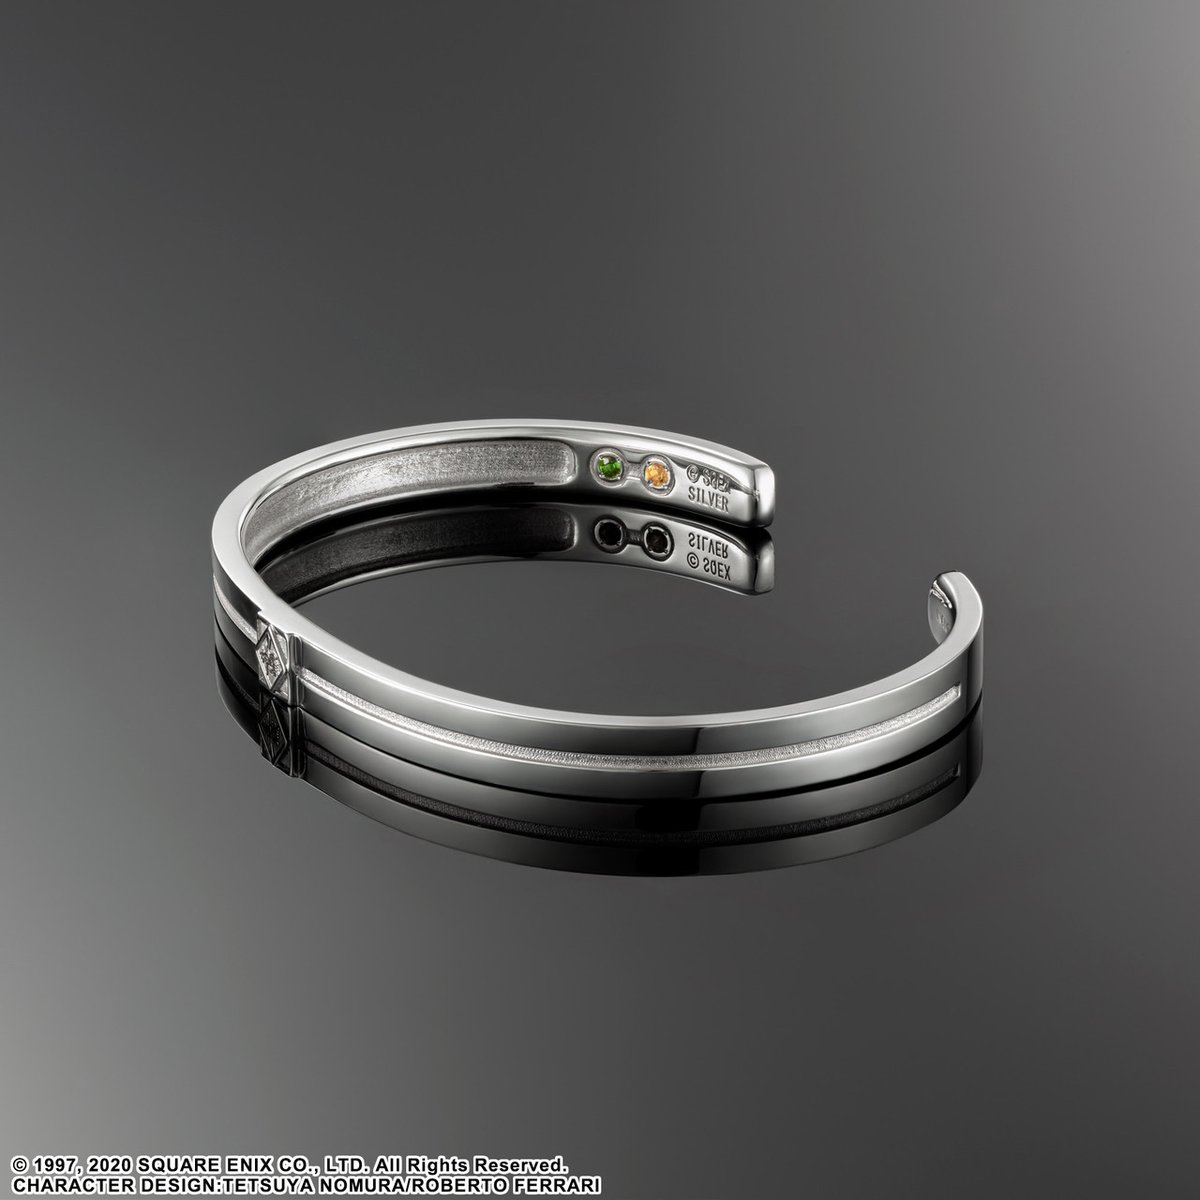 Browse and treat yourself to the latest Final Fantasy VII jewelry from the Square Enix Store! Silver Ring - Shinra Materia Type A: sqex.to/oBcoa Silver Ring - Shinra Materia Type B: sqex.to/993T3 Silver Bangle - Shinra Materia: sqex.to/a87AO